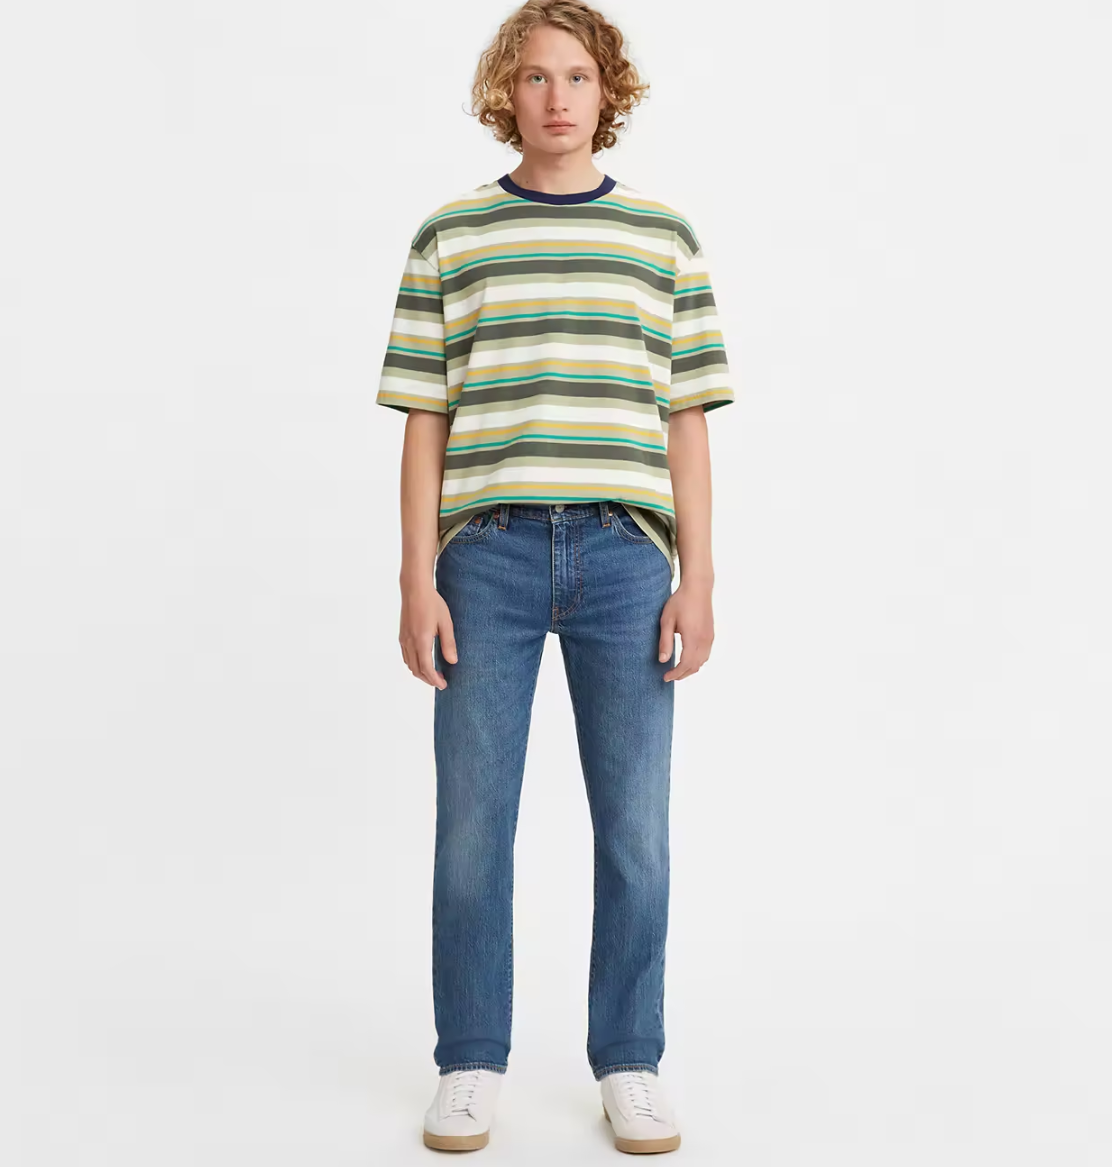 Levi's 511 Slim - Every Little Thing - Hores Stores